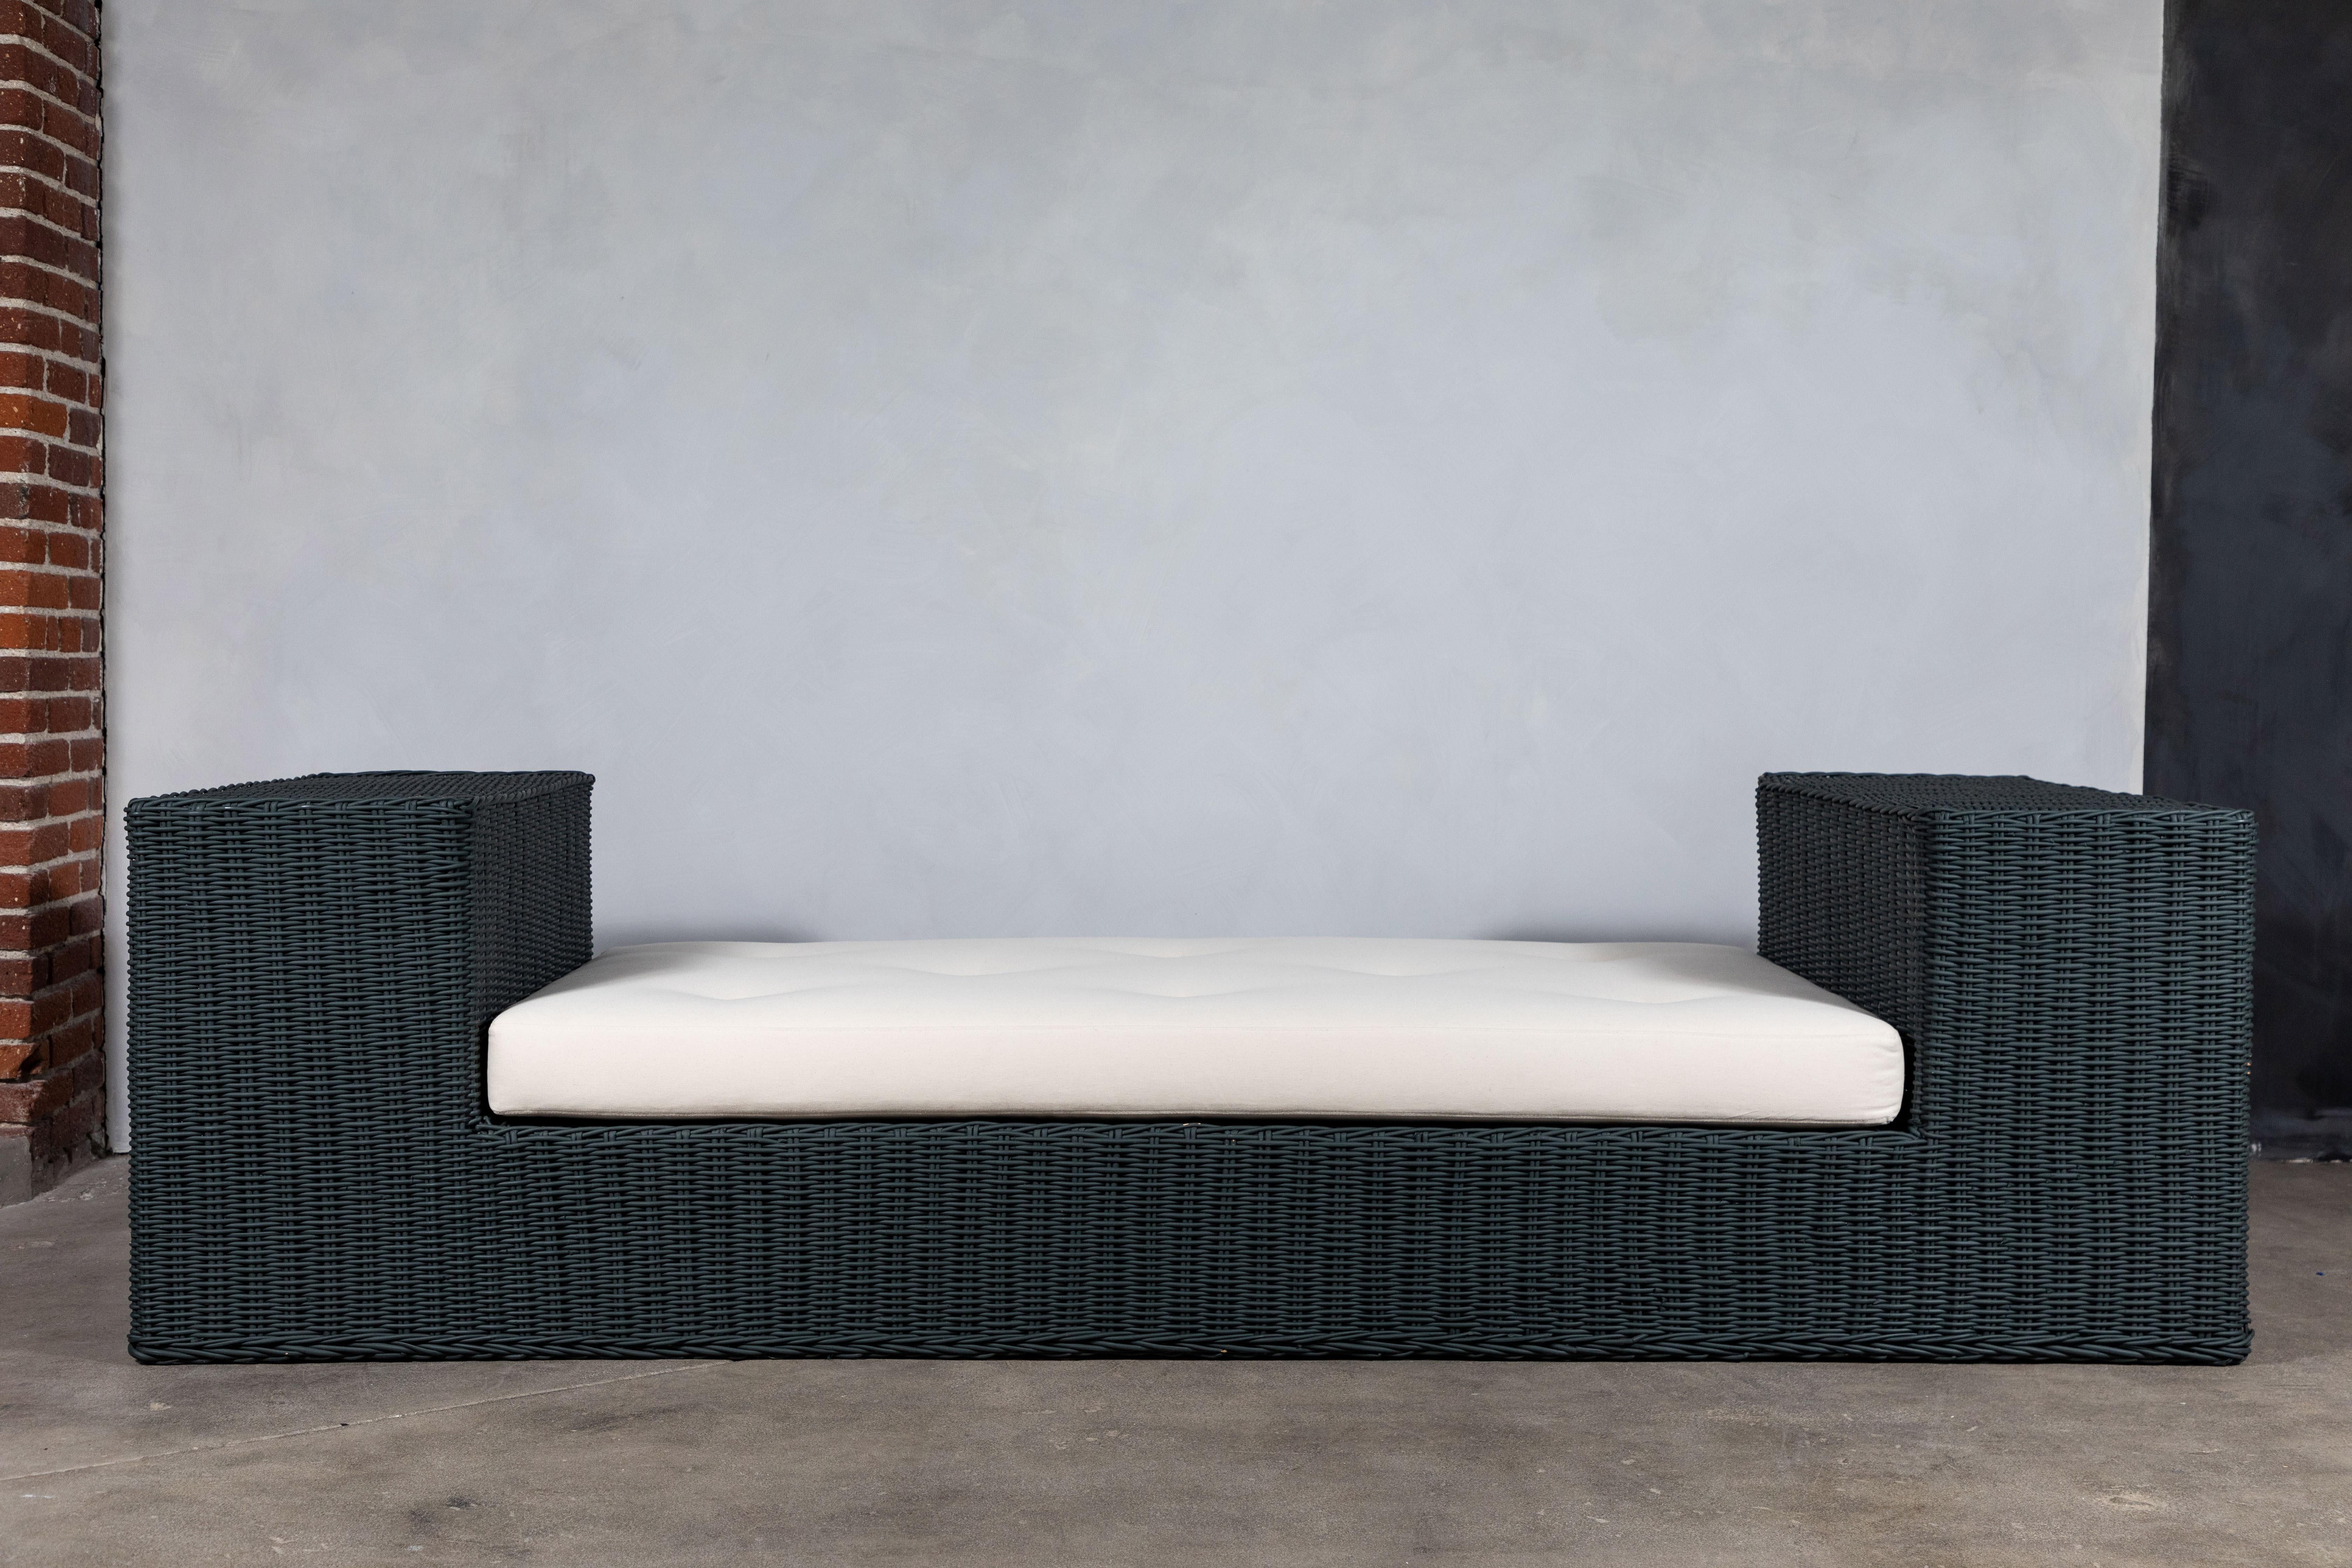 Newly Painted in Farrow and Ball Studio Green, wicker daybed. The daybed offers a large arm which can be used for sitting our serving. Newly constructed cushion with tufted pull tucks.